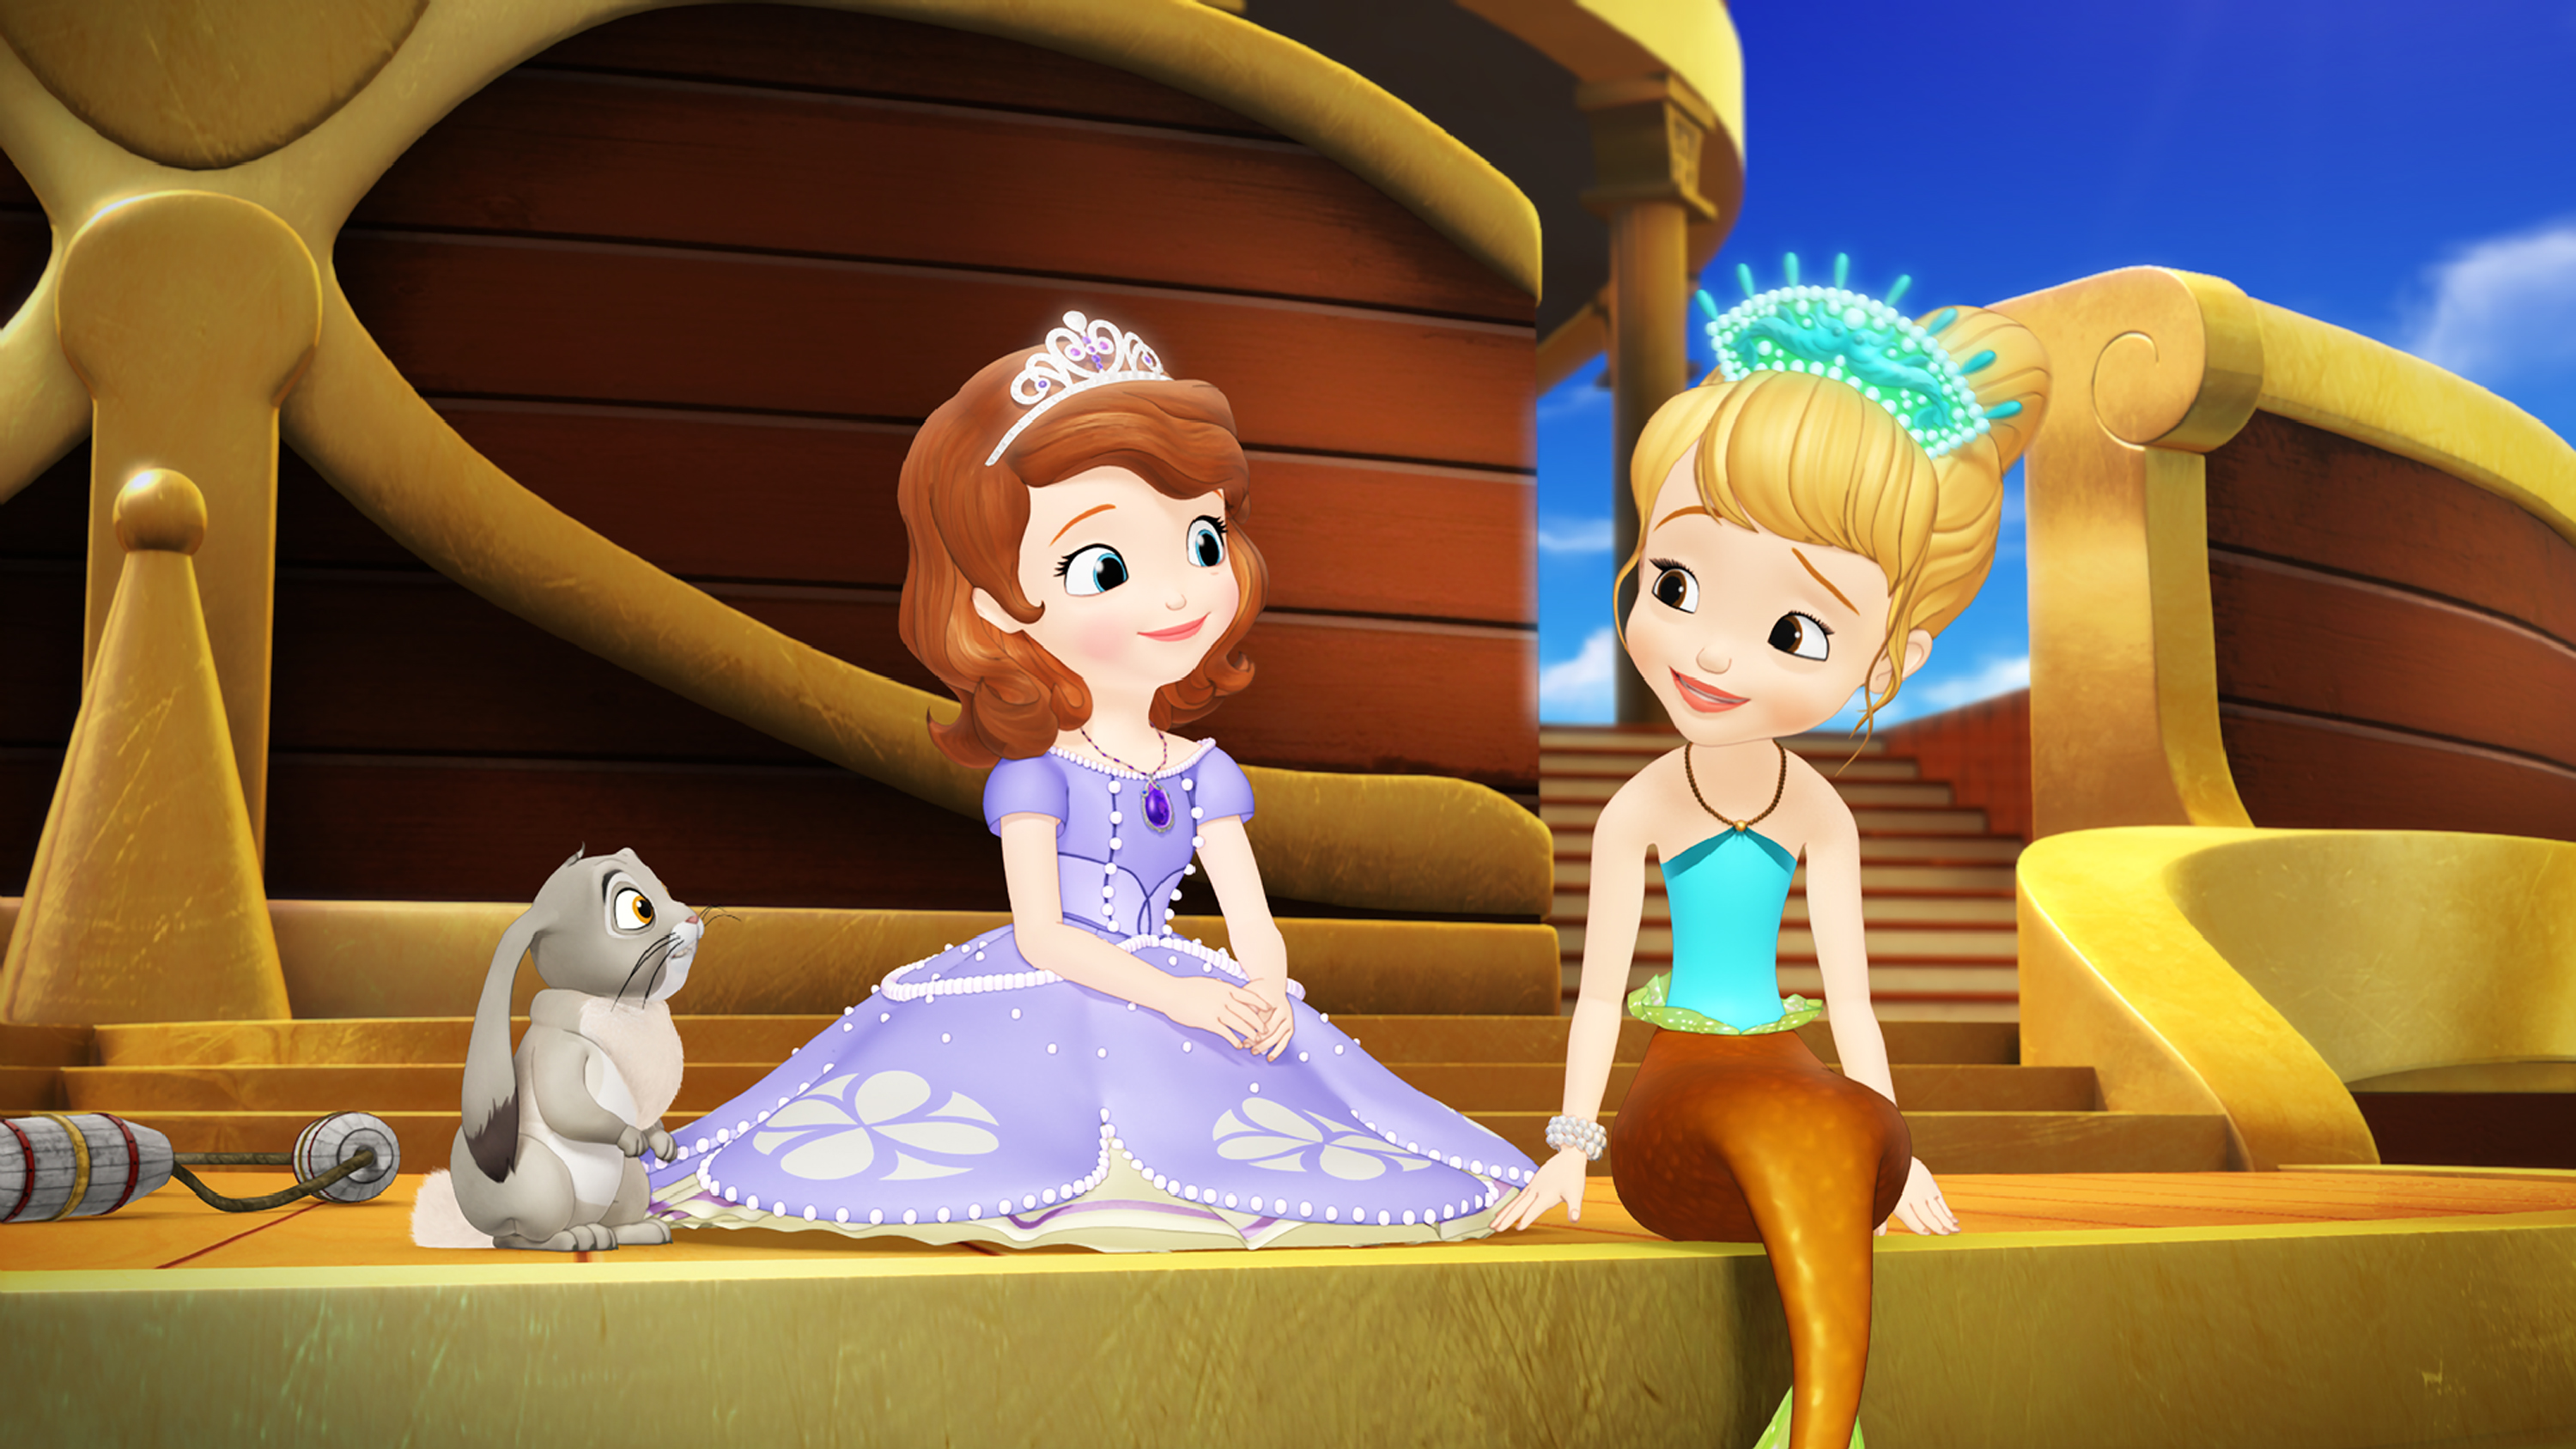 sofia the first mermaid episode